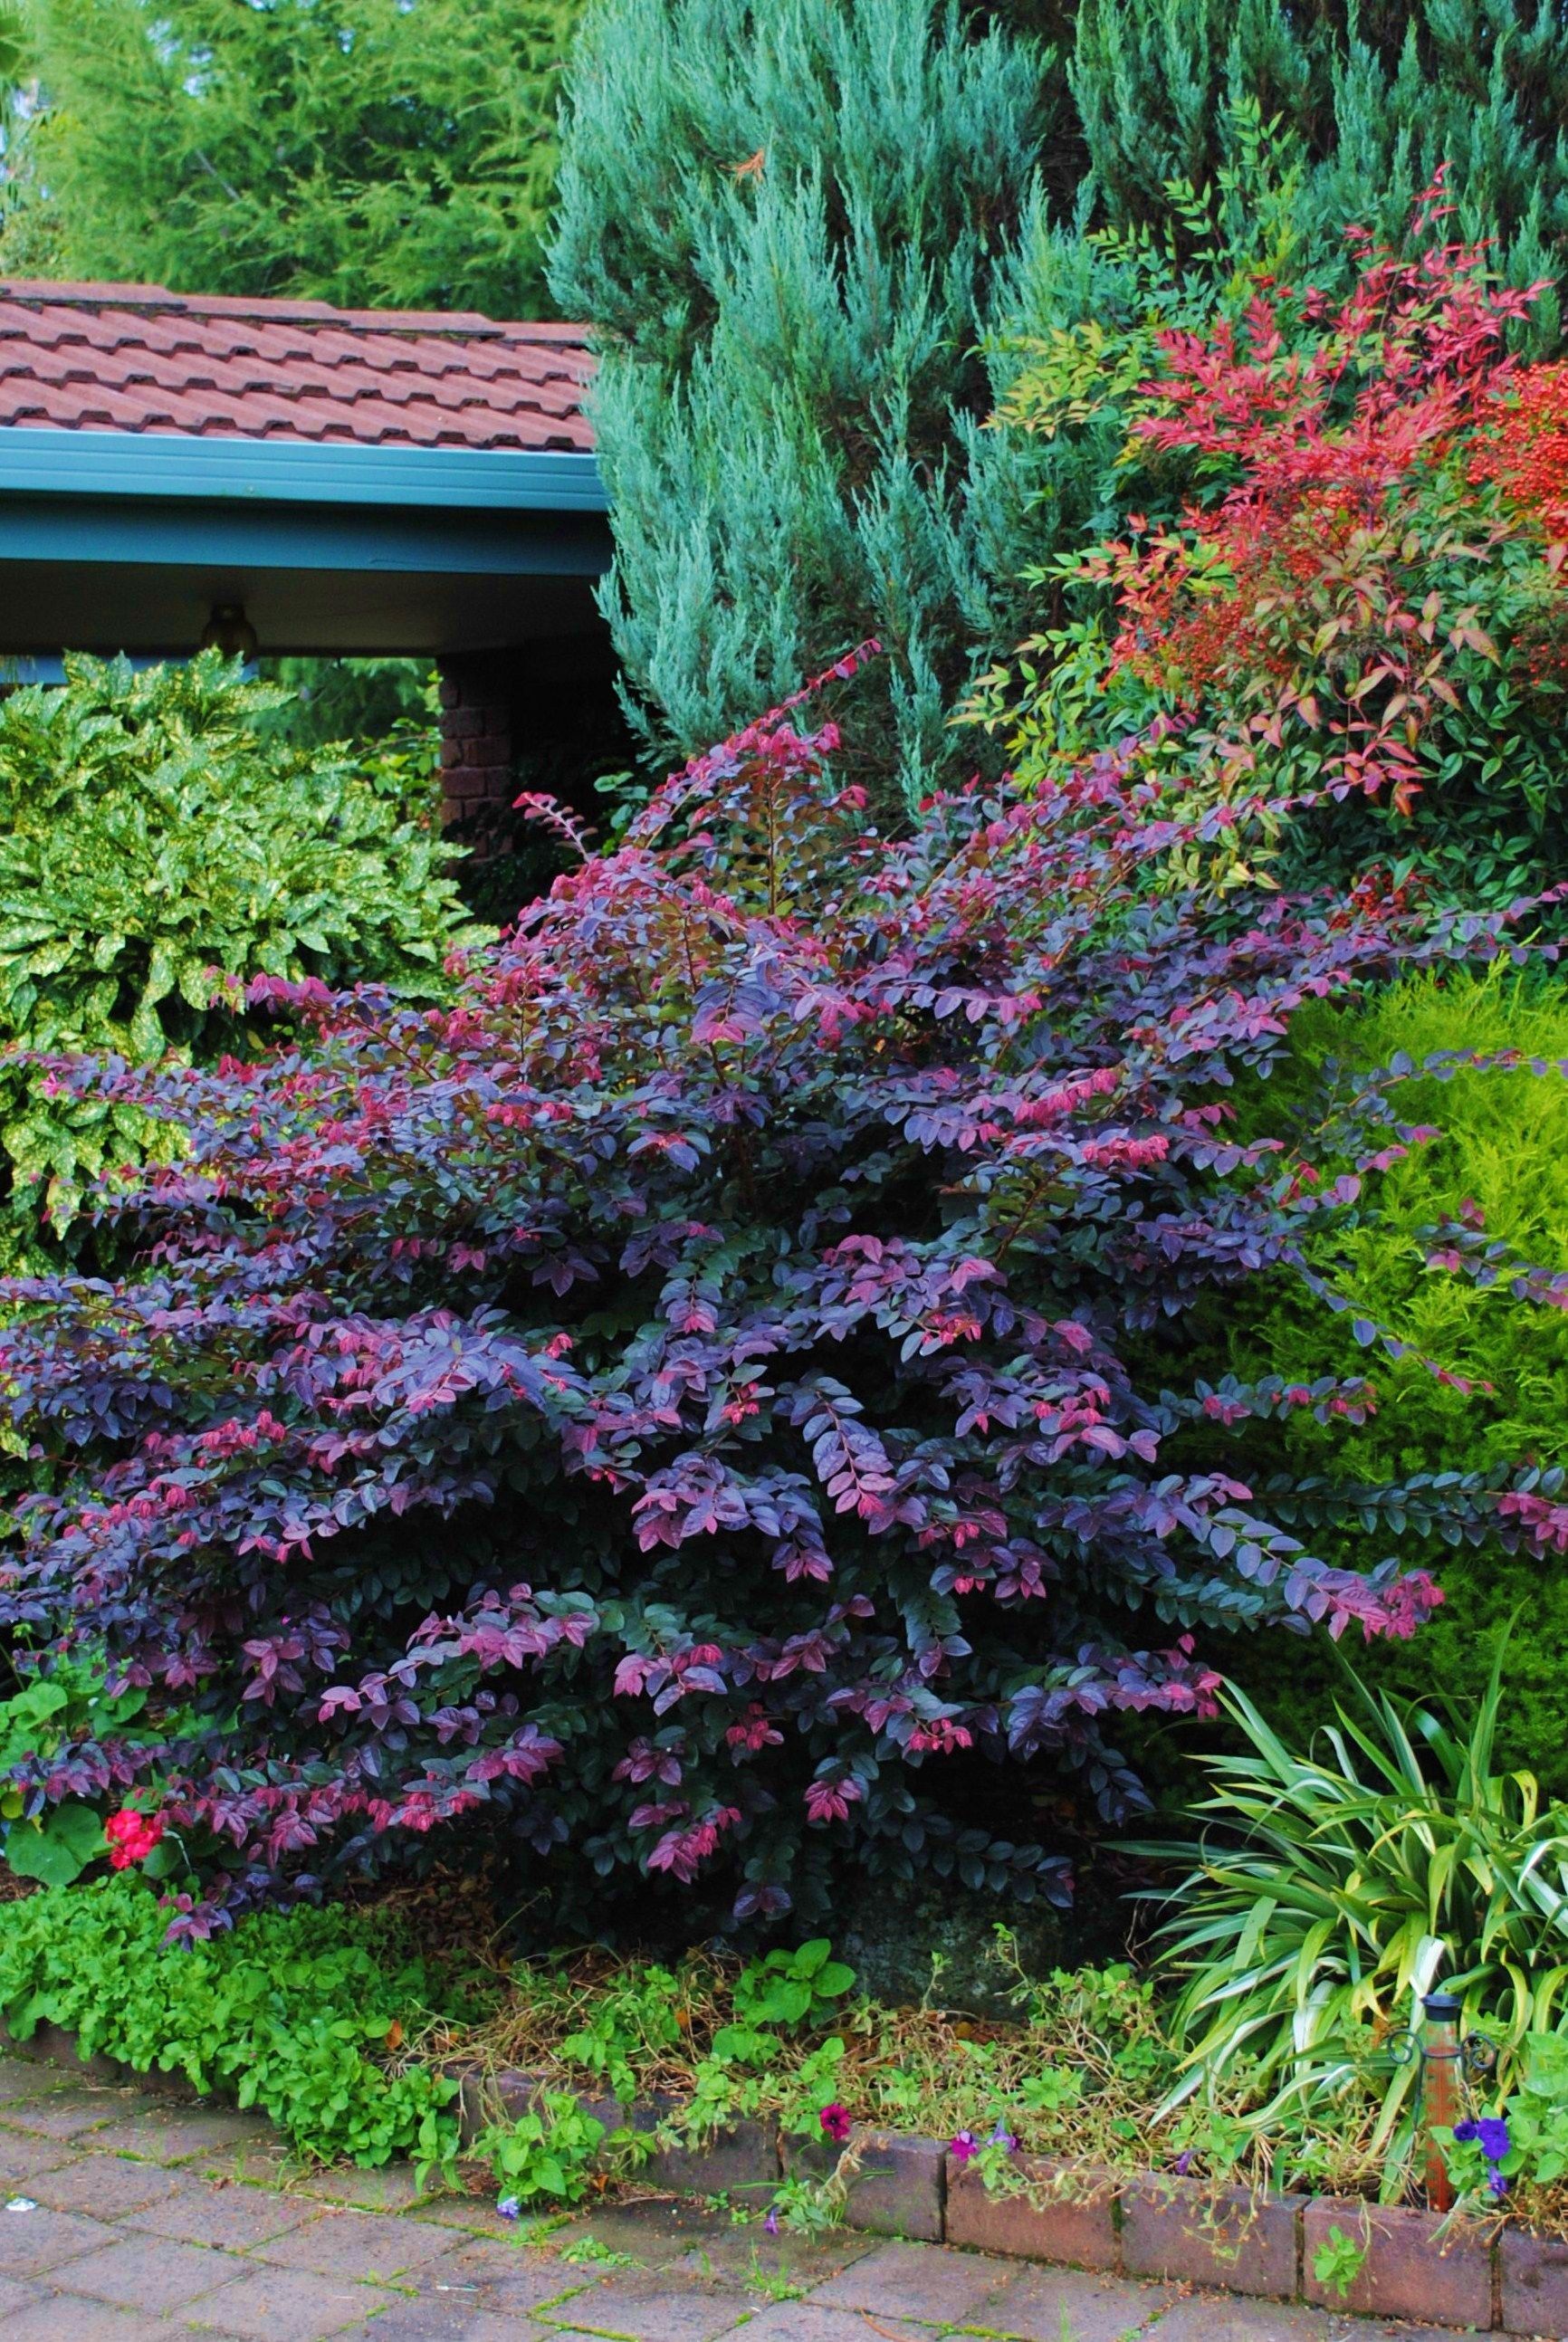 Loropetalum Purple Prince- The color on this shrub can add nice contrast against light colors.